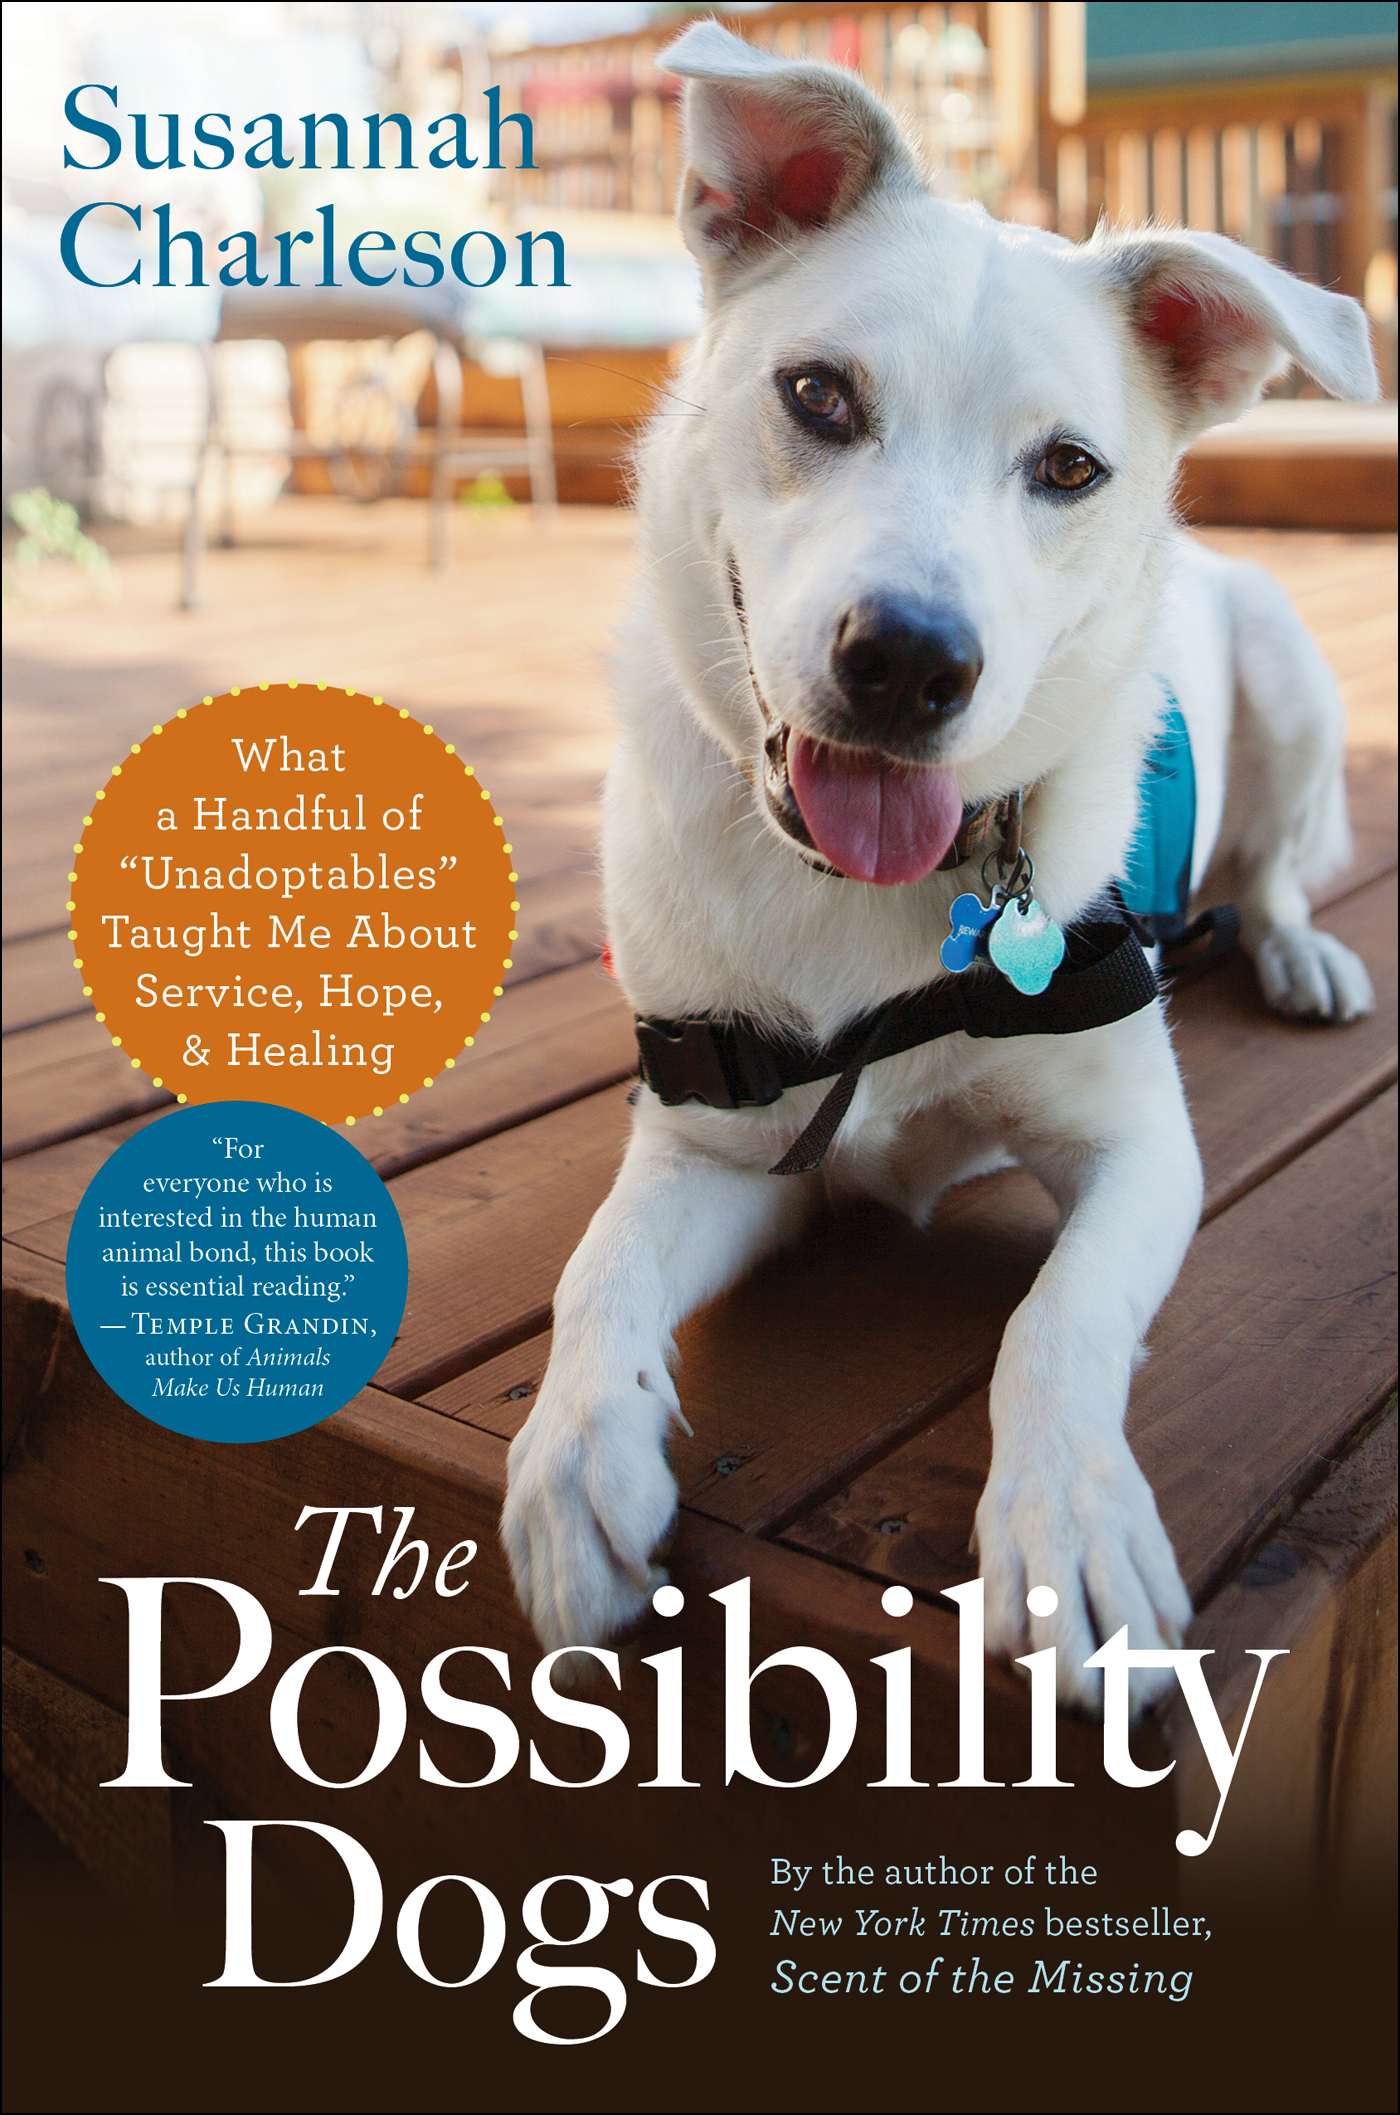 Image de couverture de The Possibility Dogs [electronic resource] : What a Handful of "Unadoptables" Taught Me About Service, Hope, & Healing